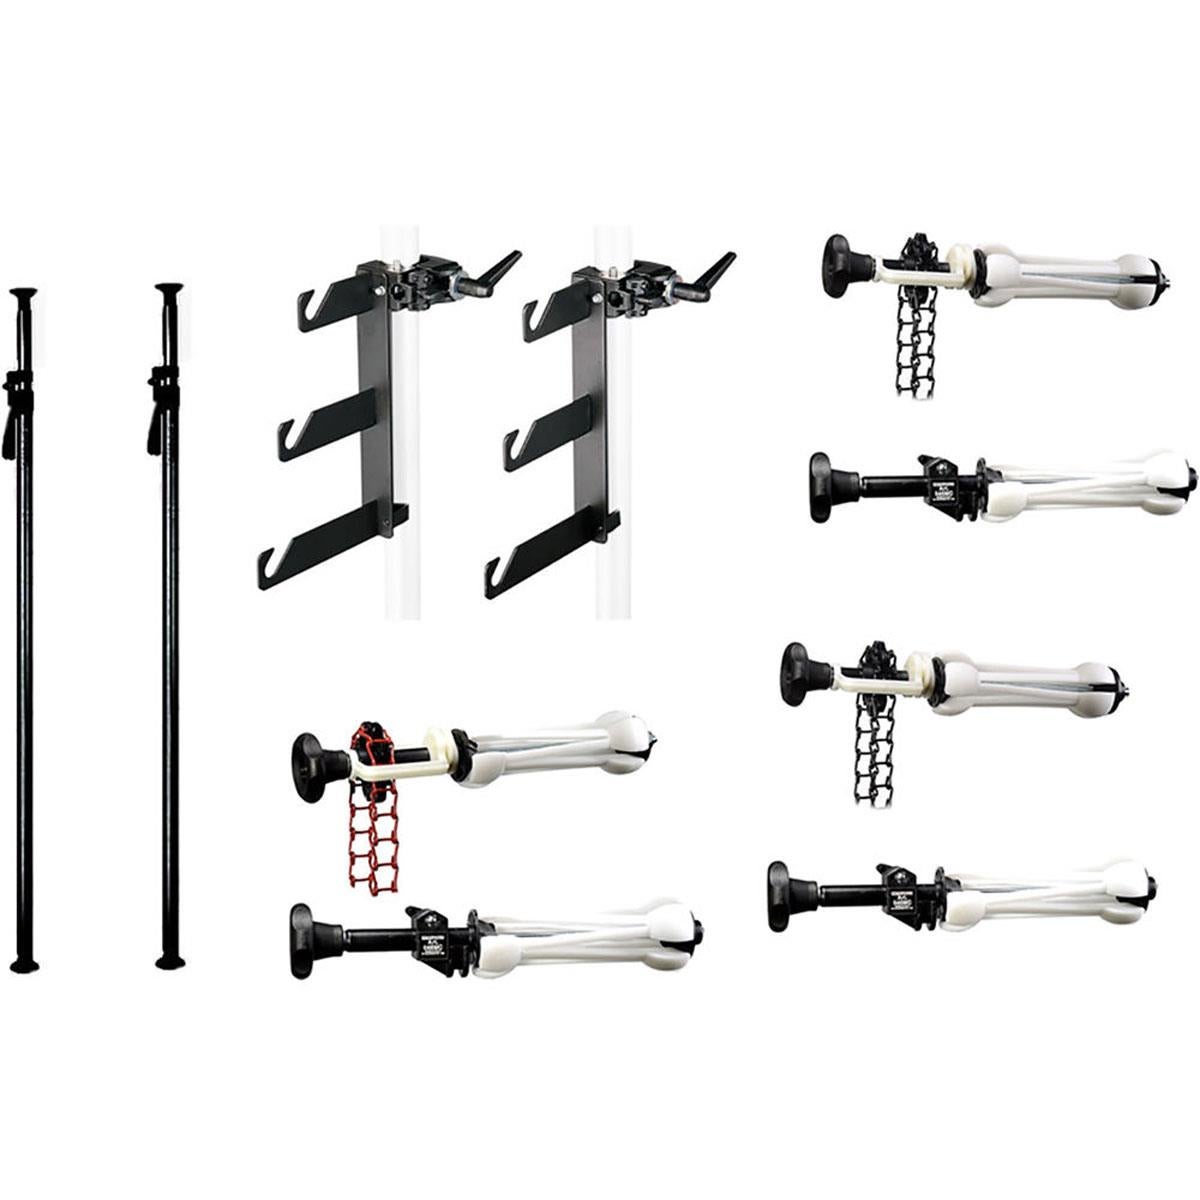 Manfrotto background set components.